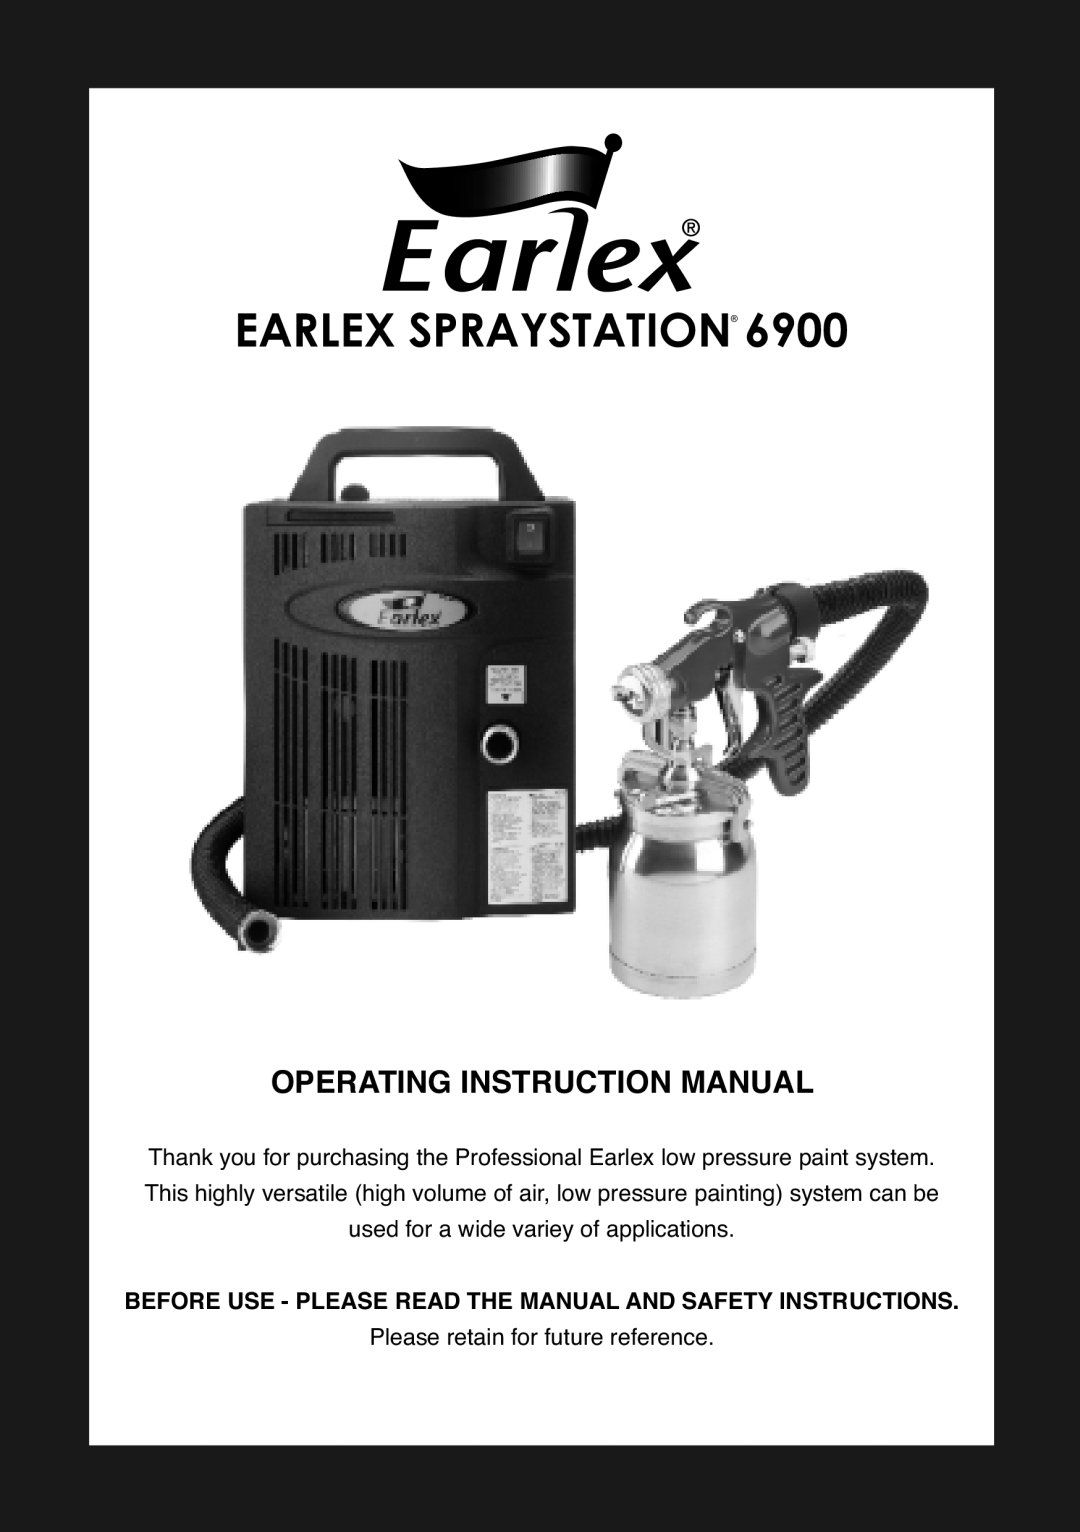 Earlex 6900 instruction manual Earlex Spraystation, Operating Instruction Manual, Please retain for future reference 